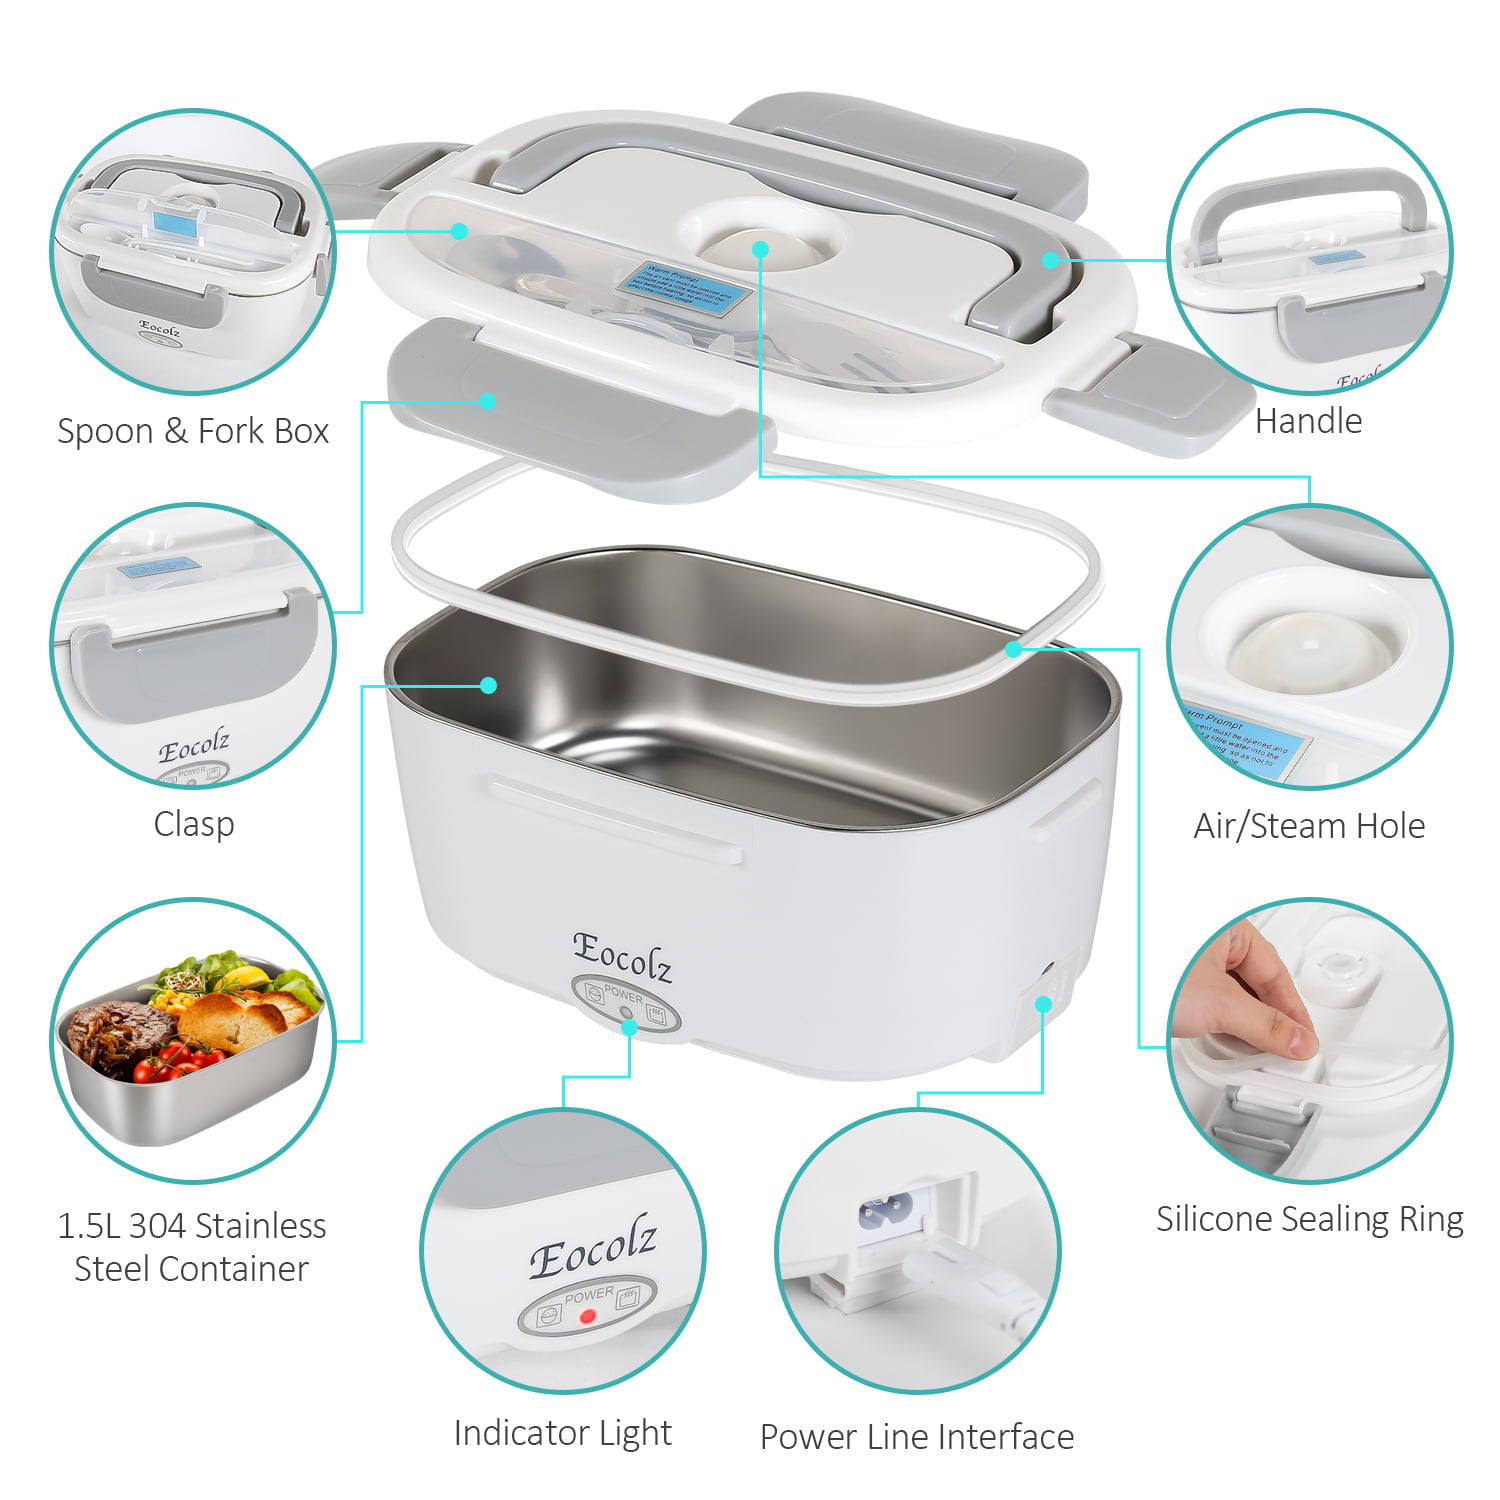 Stainless Steel Dual Use Electric Lunchbox  For School, Car, Picnic  220V/110V, 24V & 12V Food Heater & Warmer Container 221022 From Ning010,  $27.69